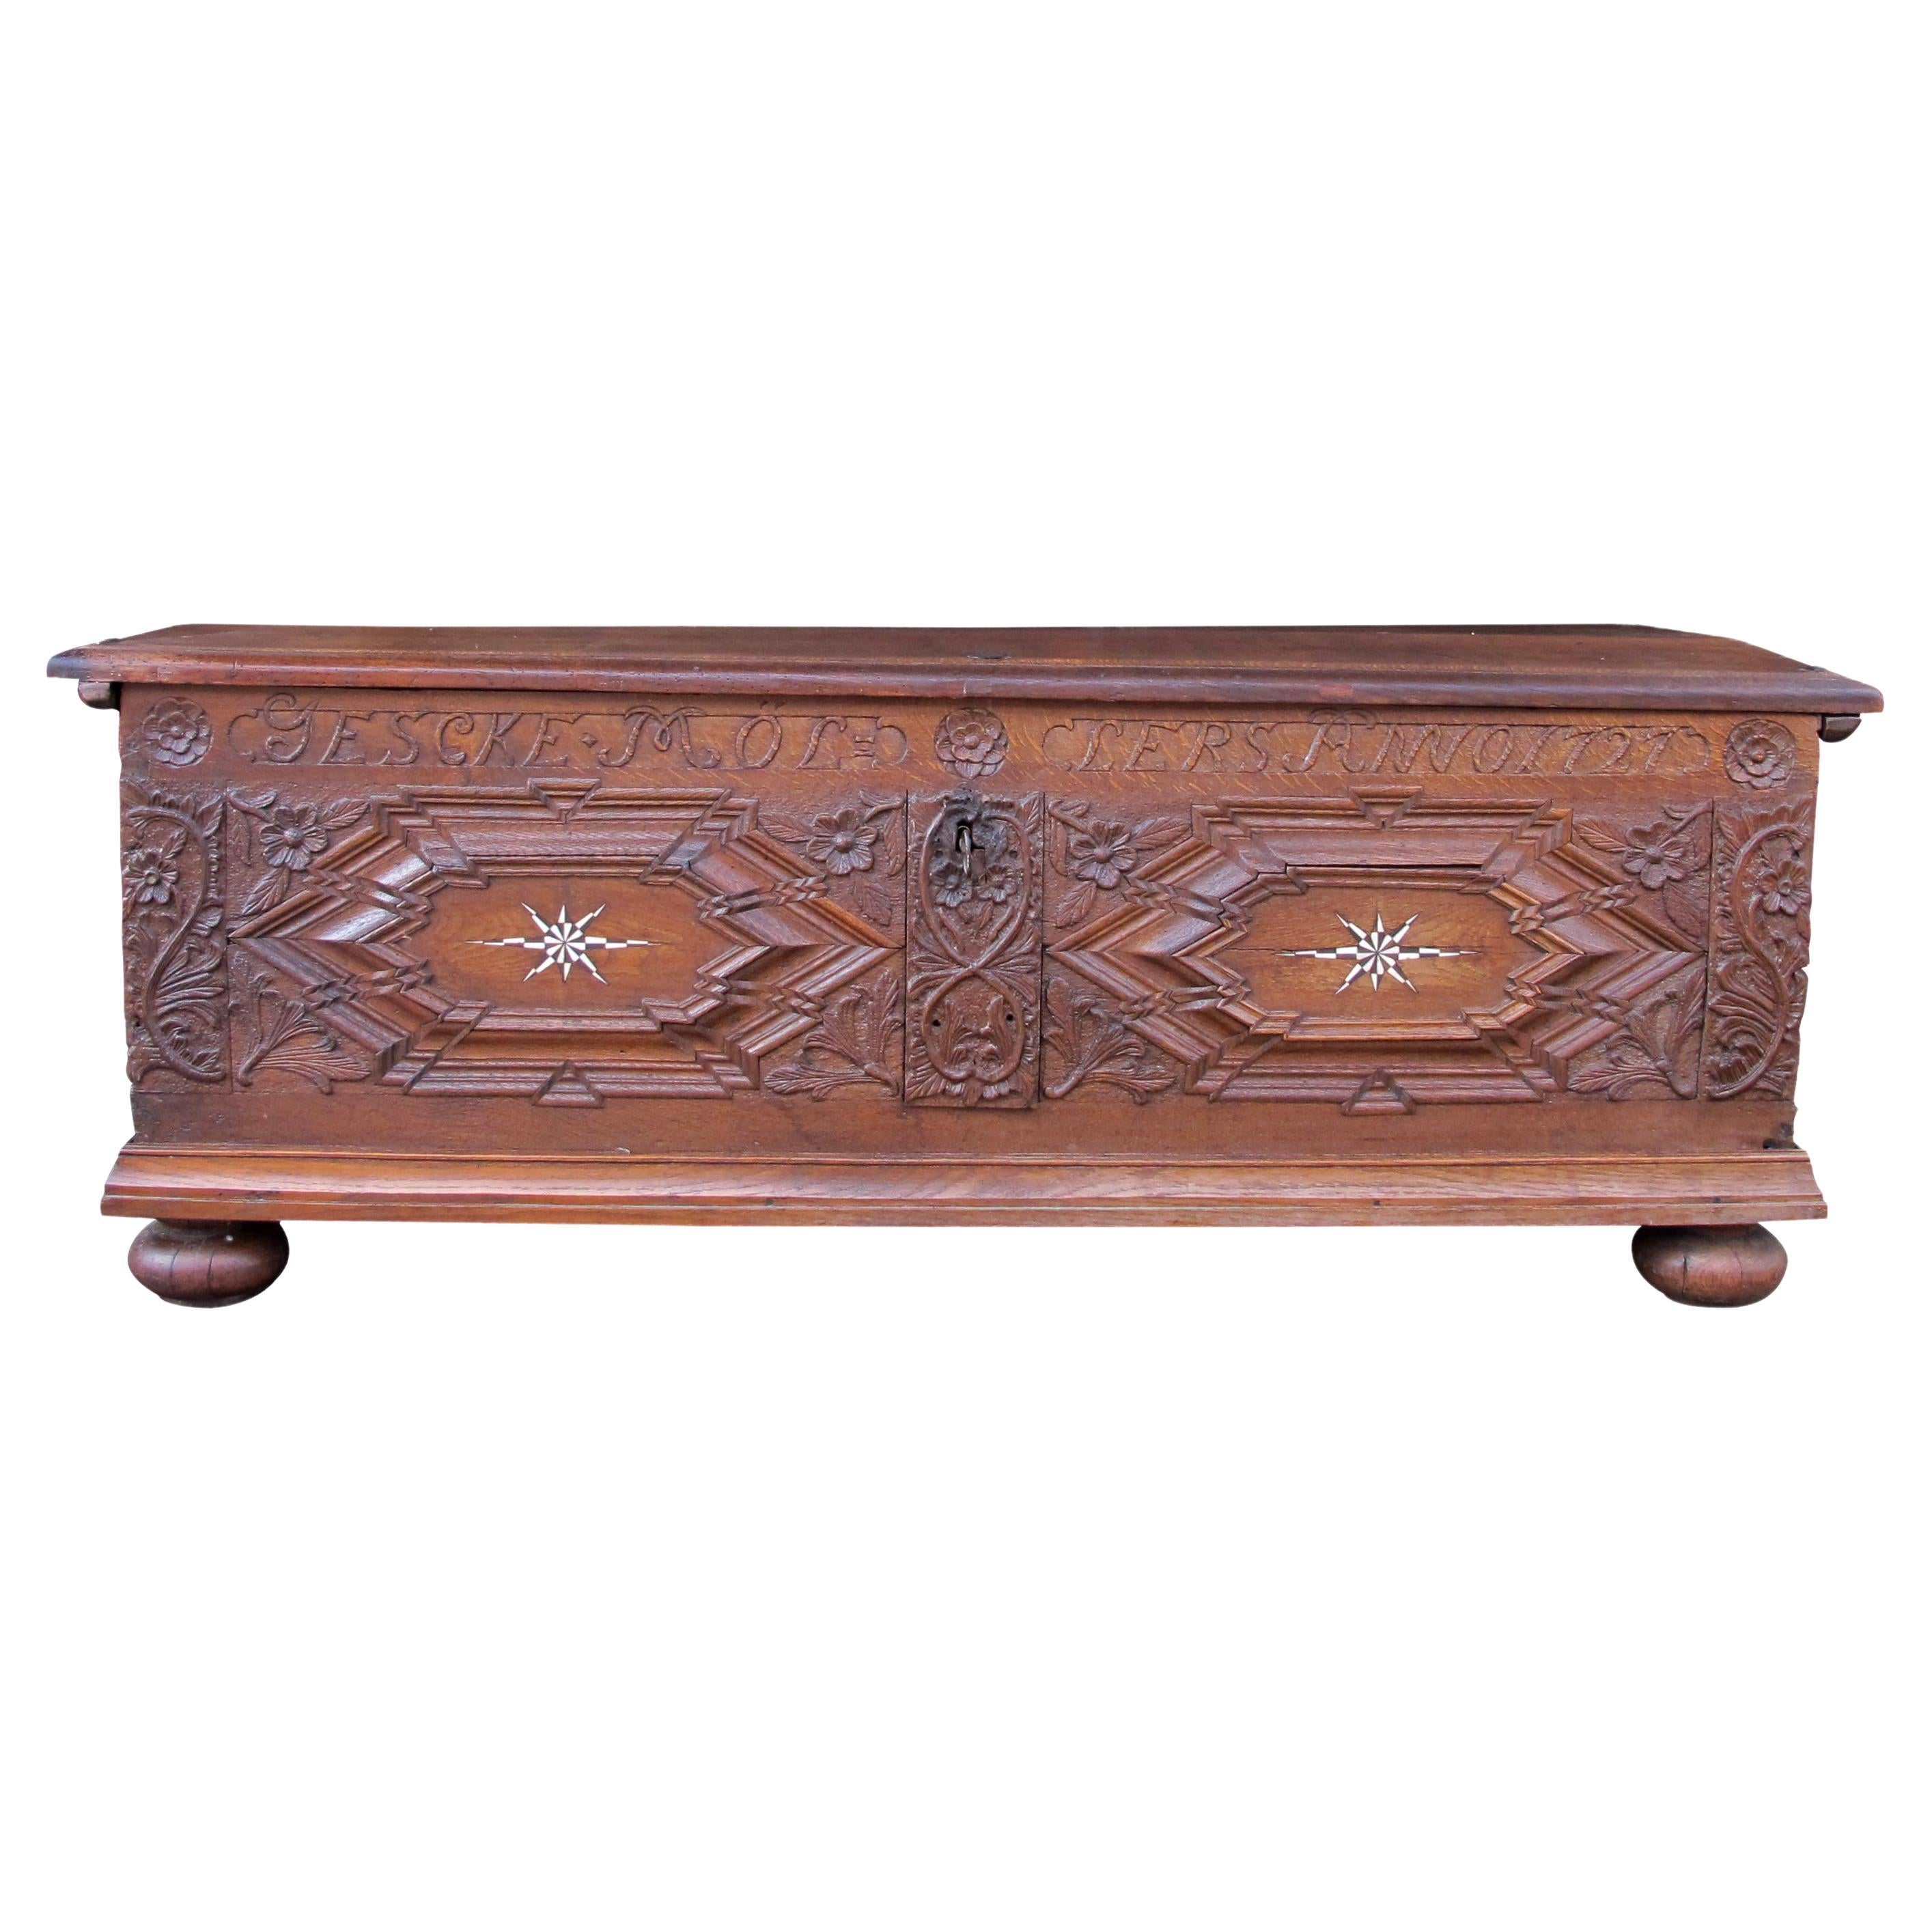 Early 18th Century Large Marriage Oak Trunk With a Vaulted Lid and Carvings